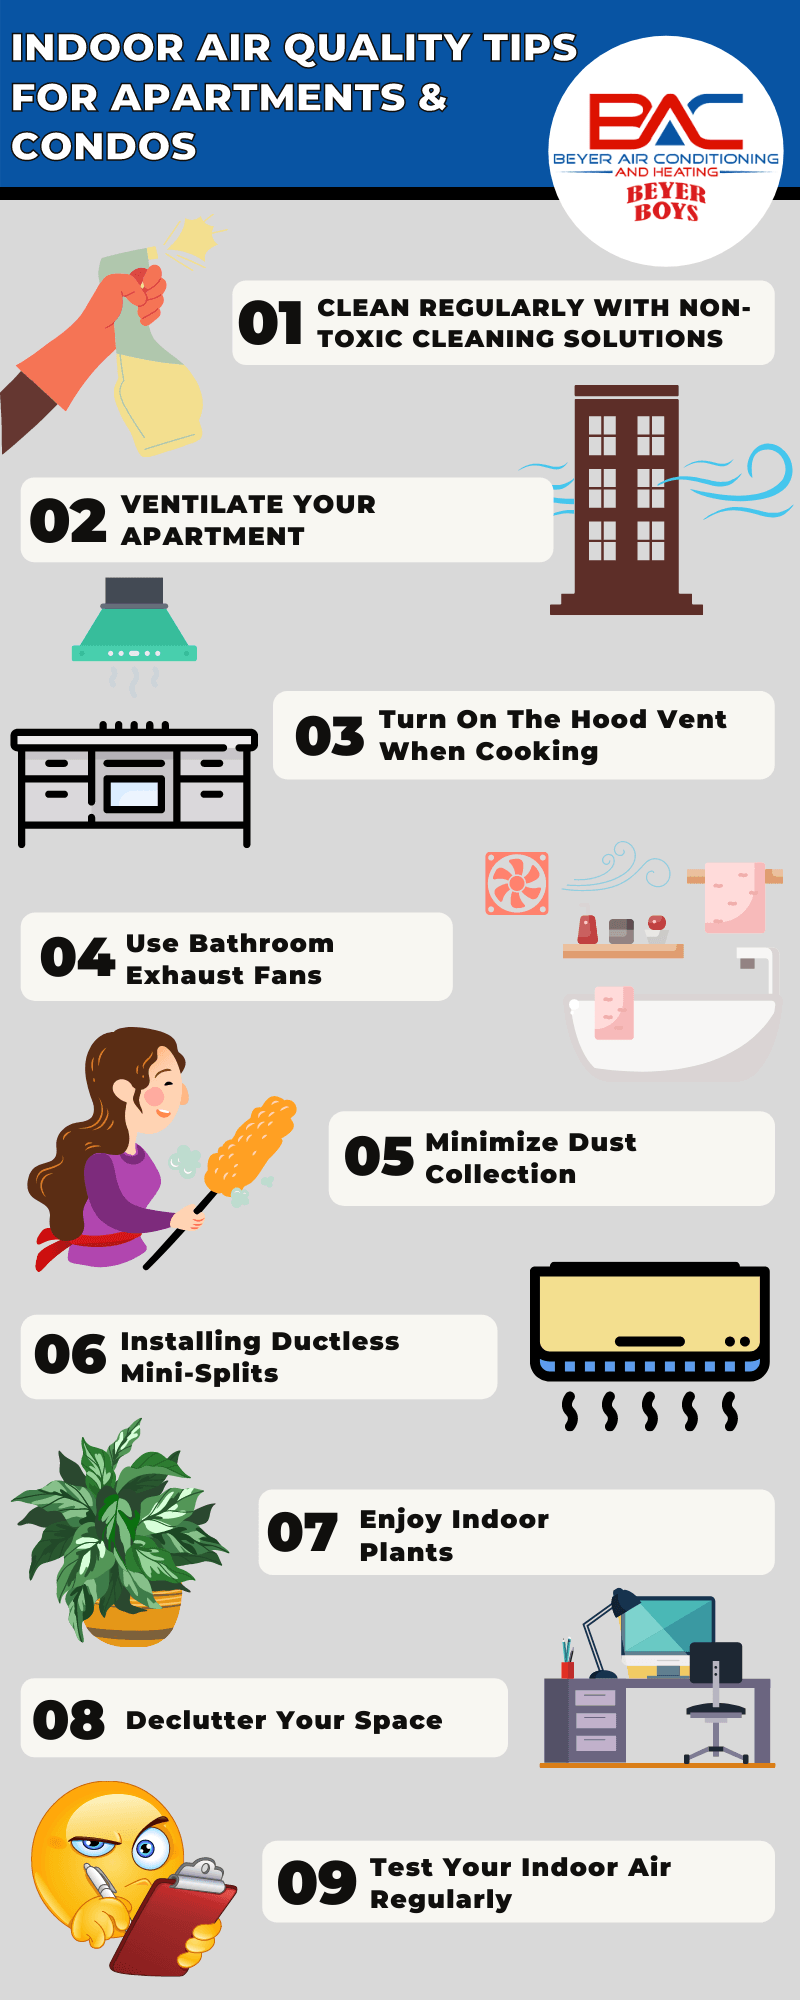 Indoor air quality tips infographic